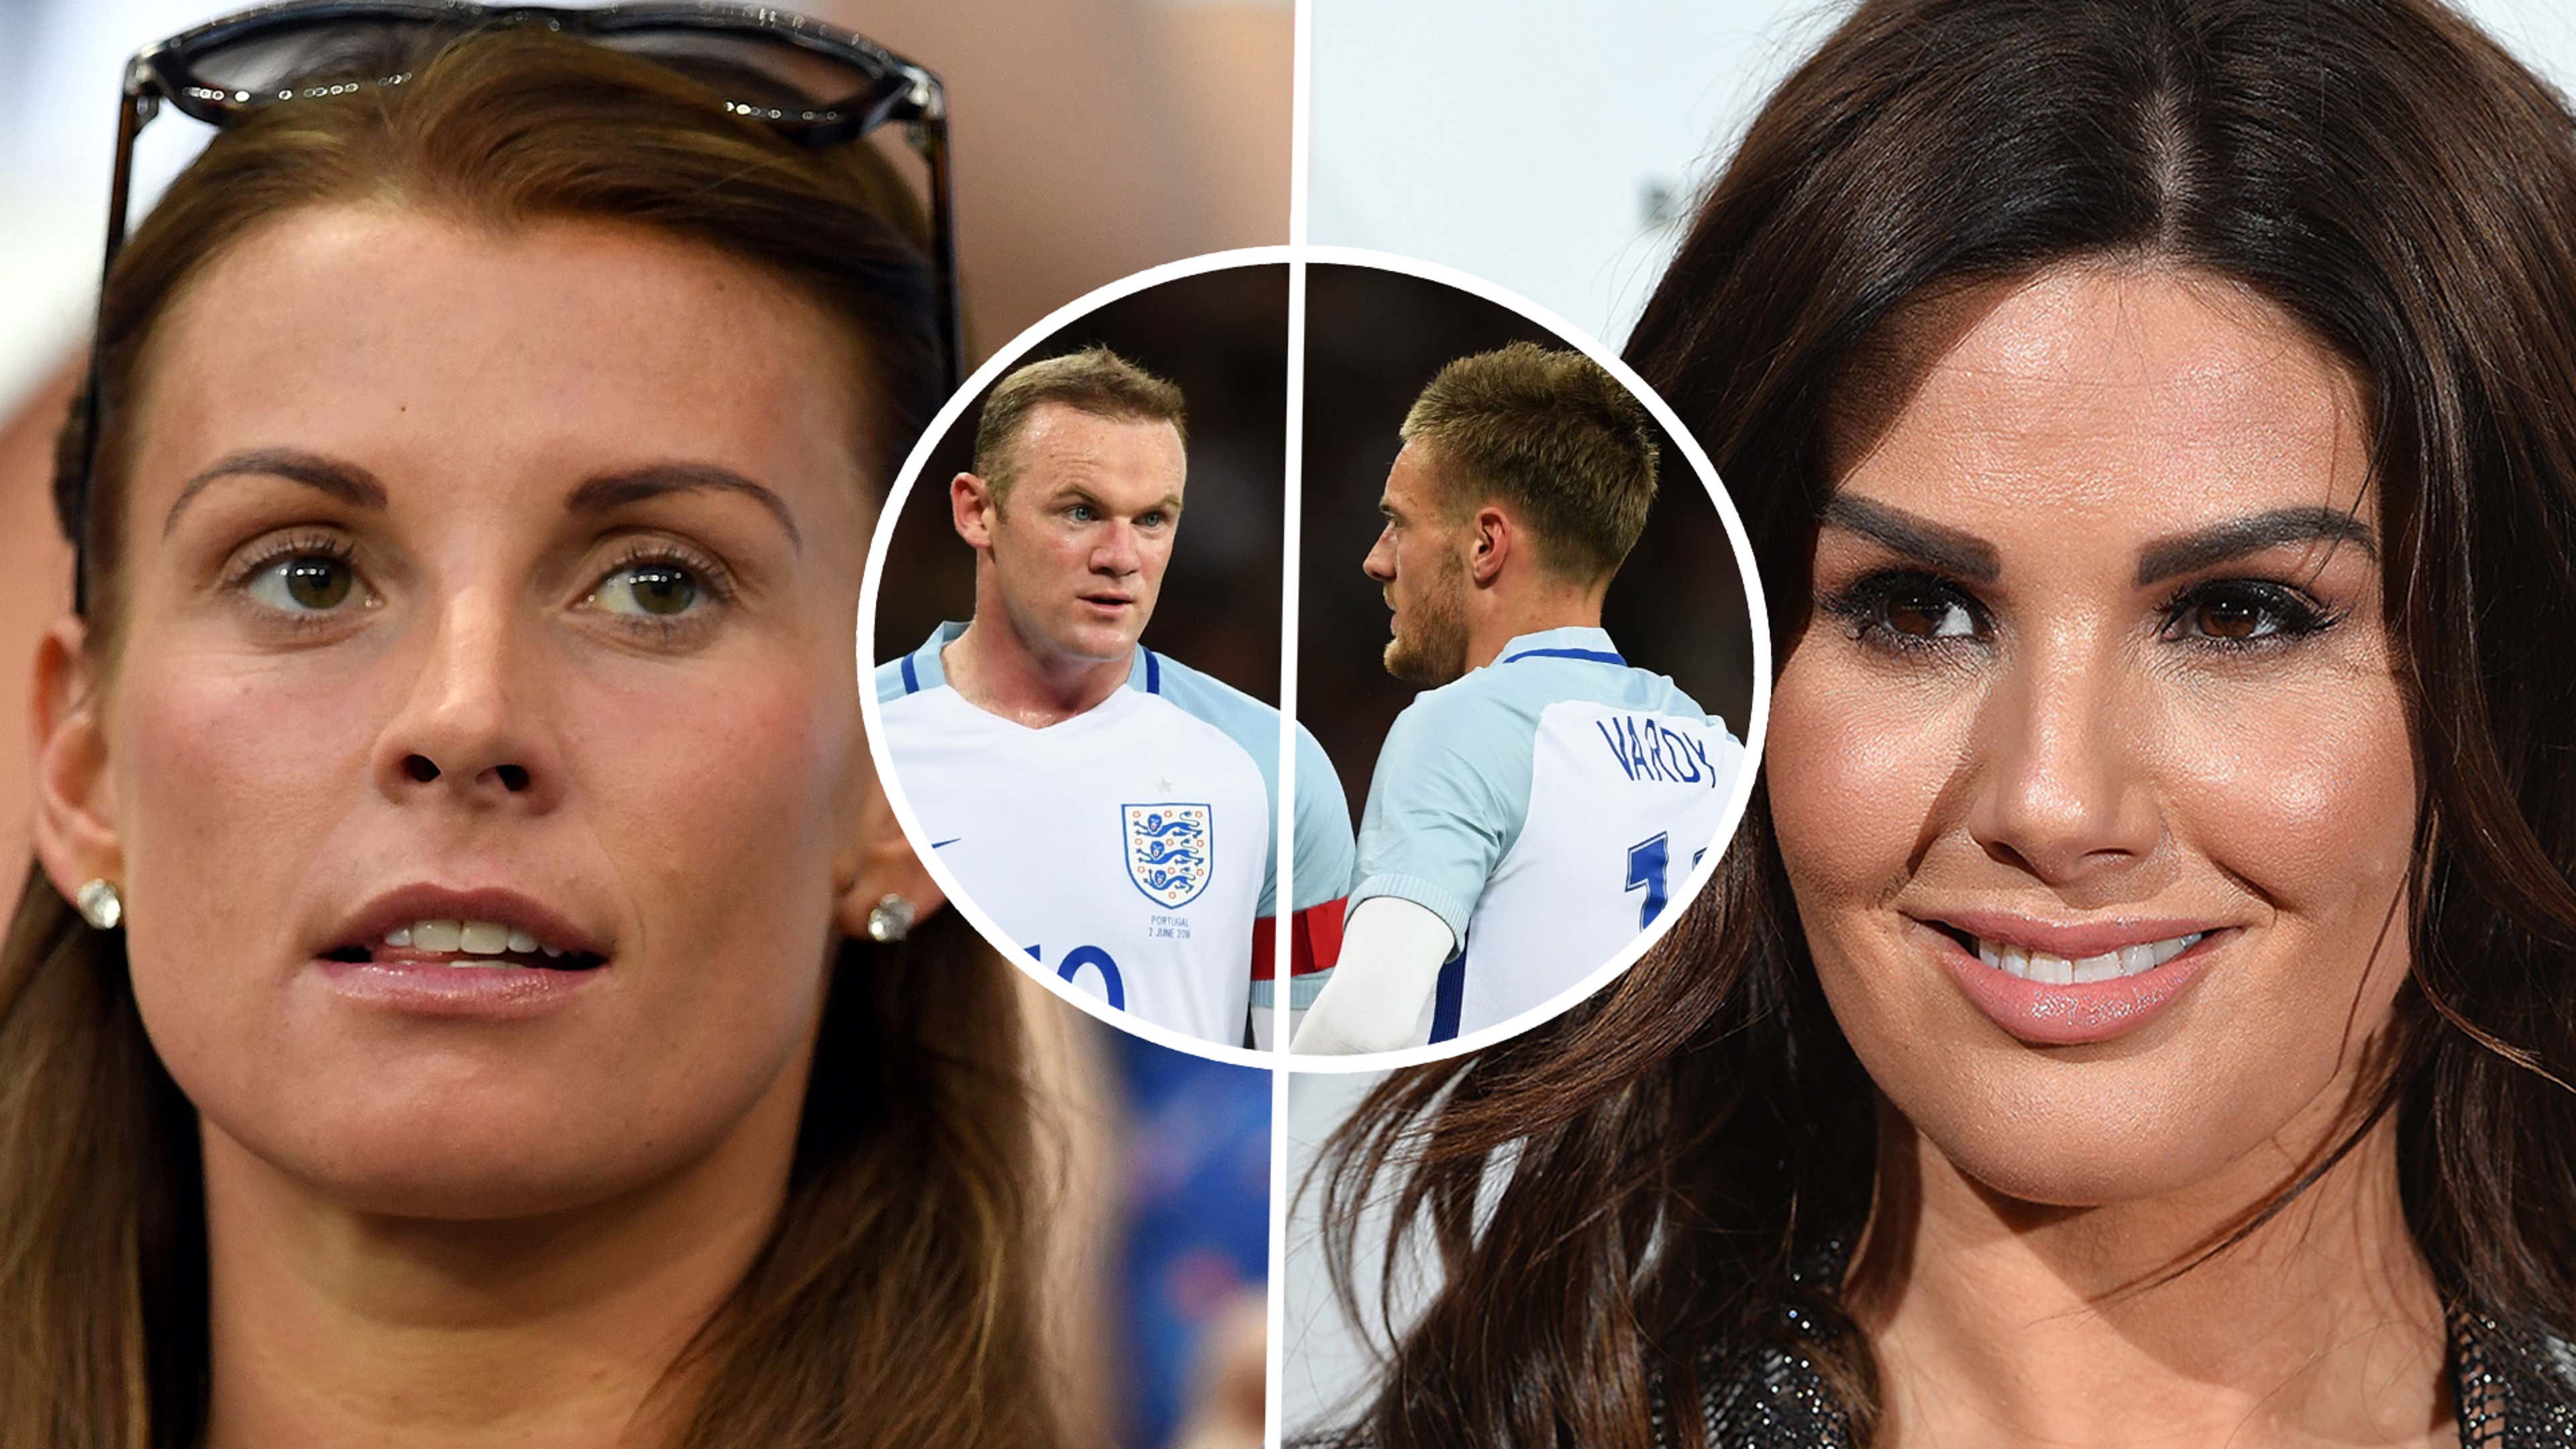 Wives of UK soccer stars in Twitter spat over story leaks to tabloids